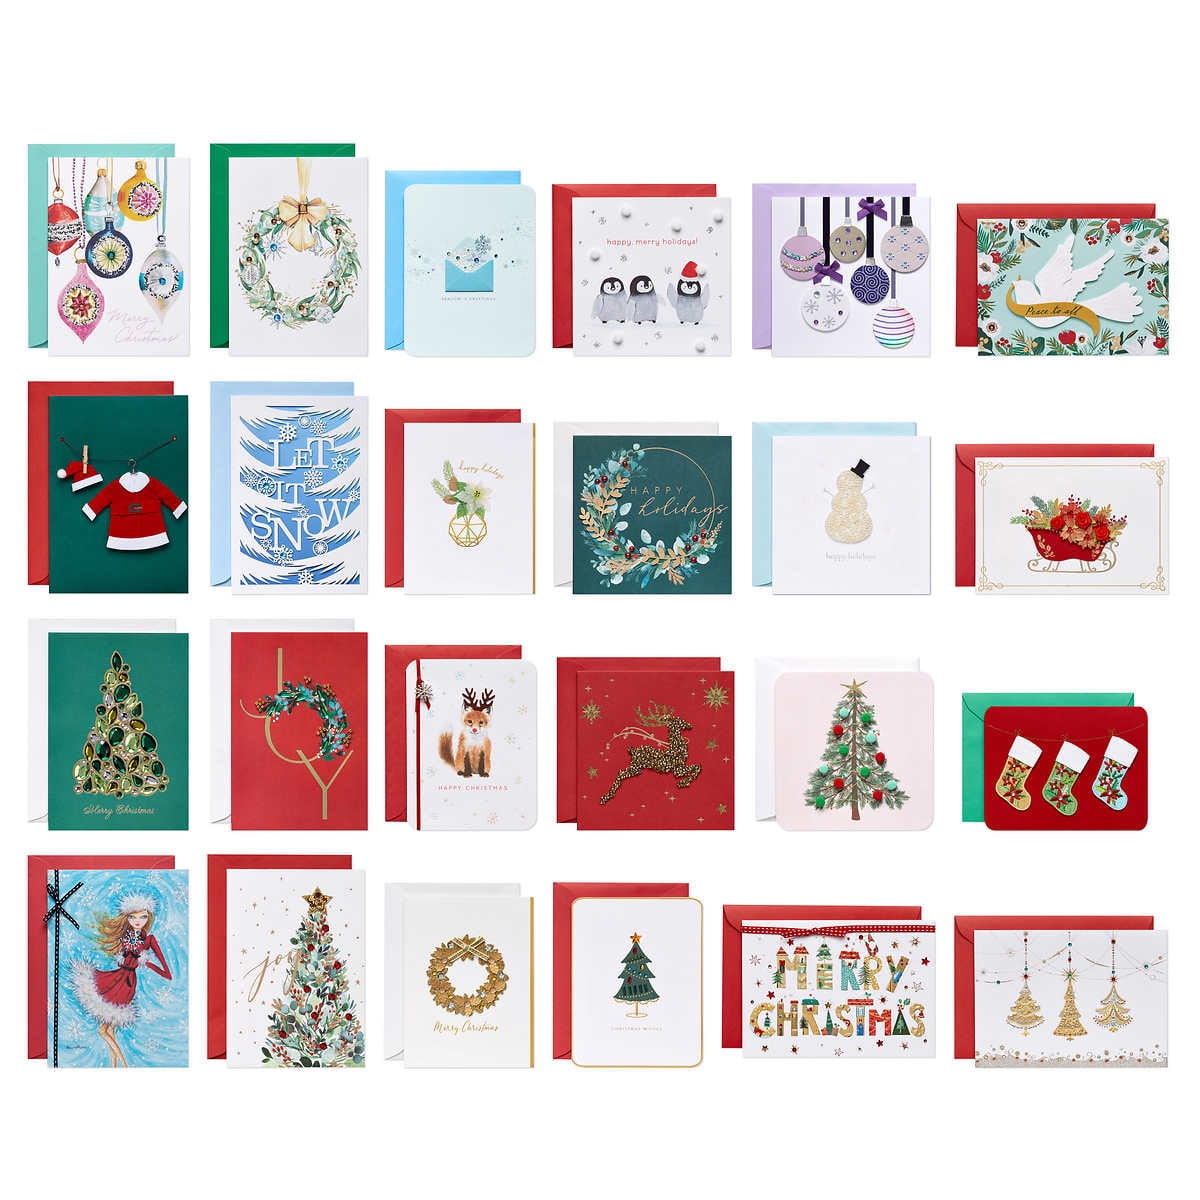 Papyrus Hand Crafted Greeting Cards Holiday Card Collection - 24 Count